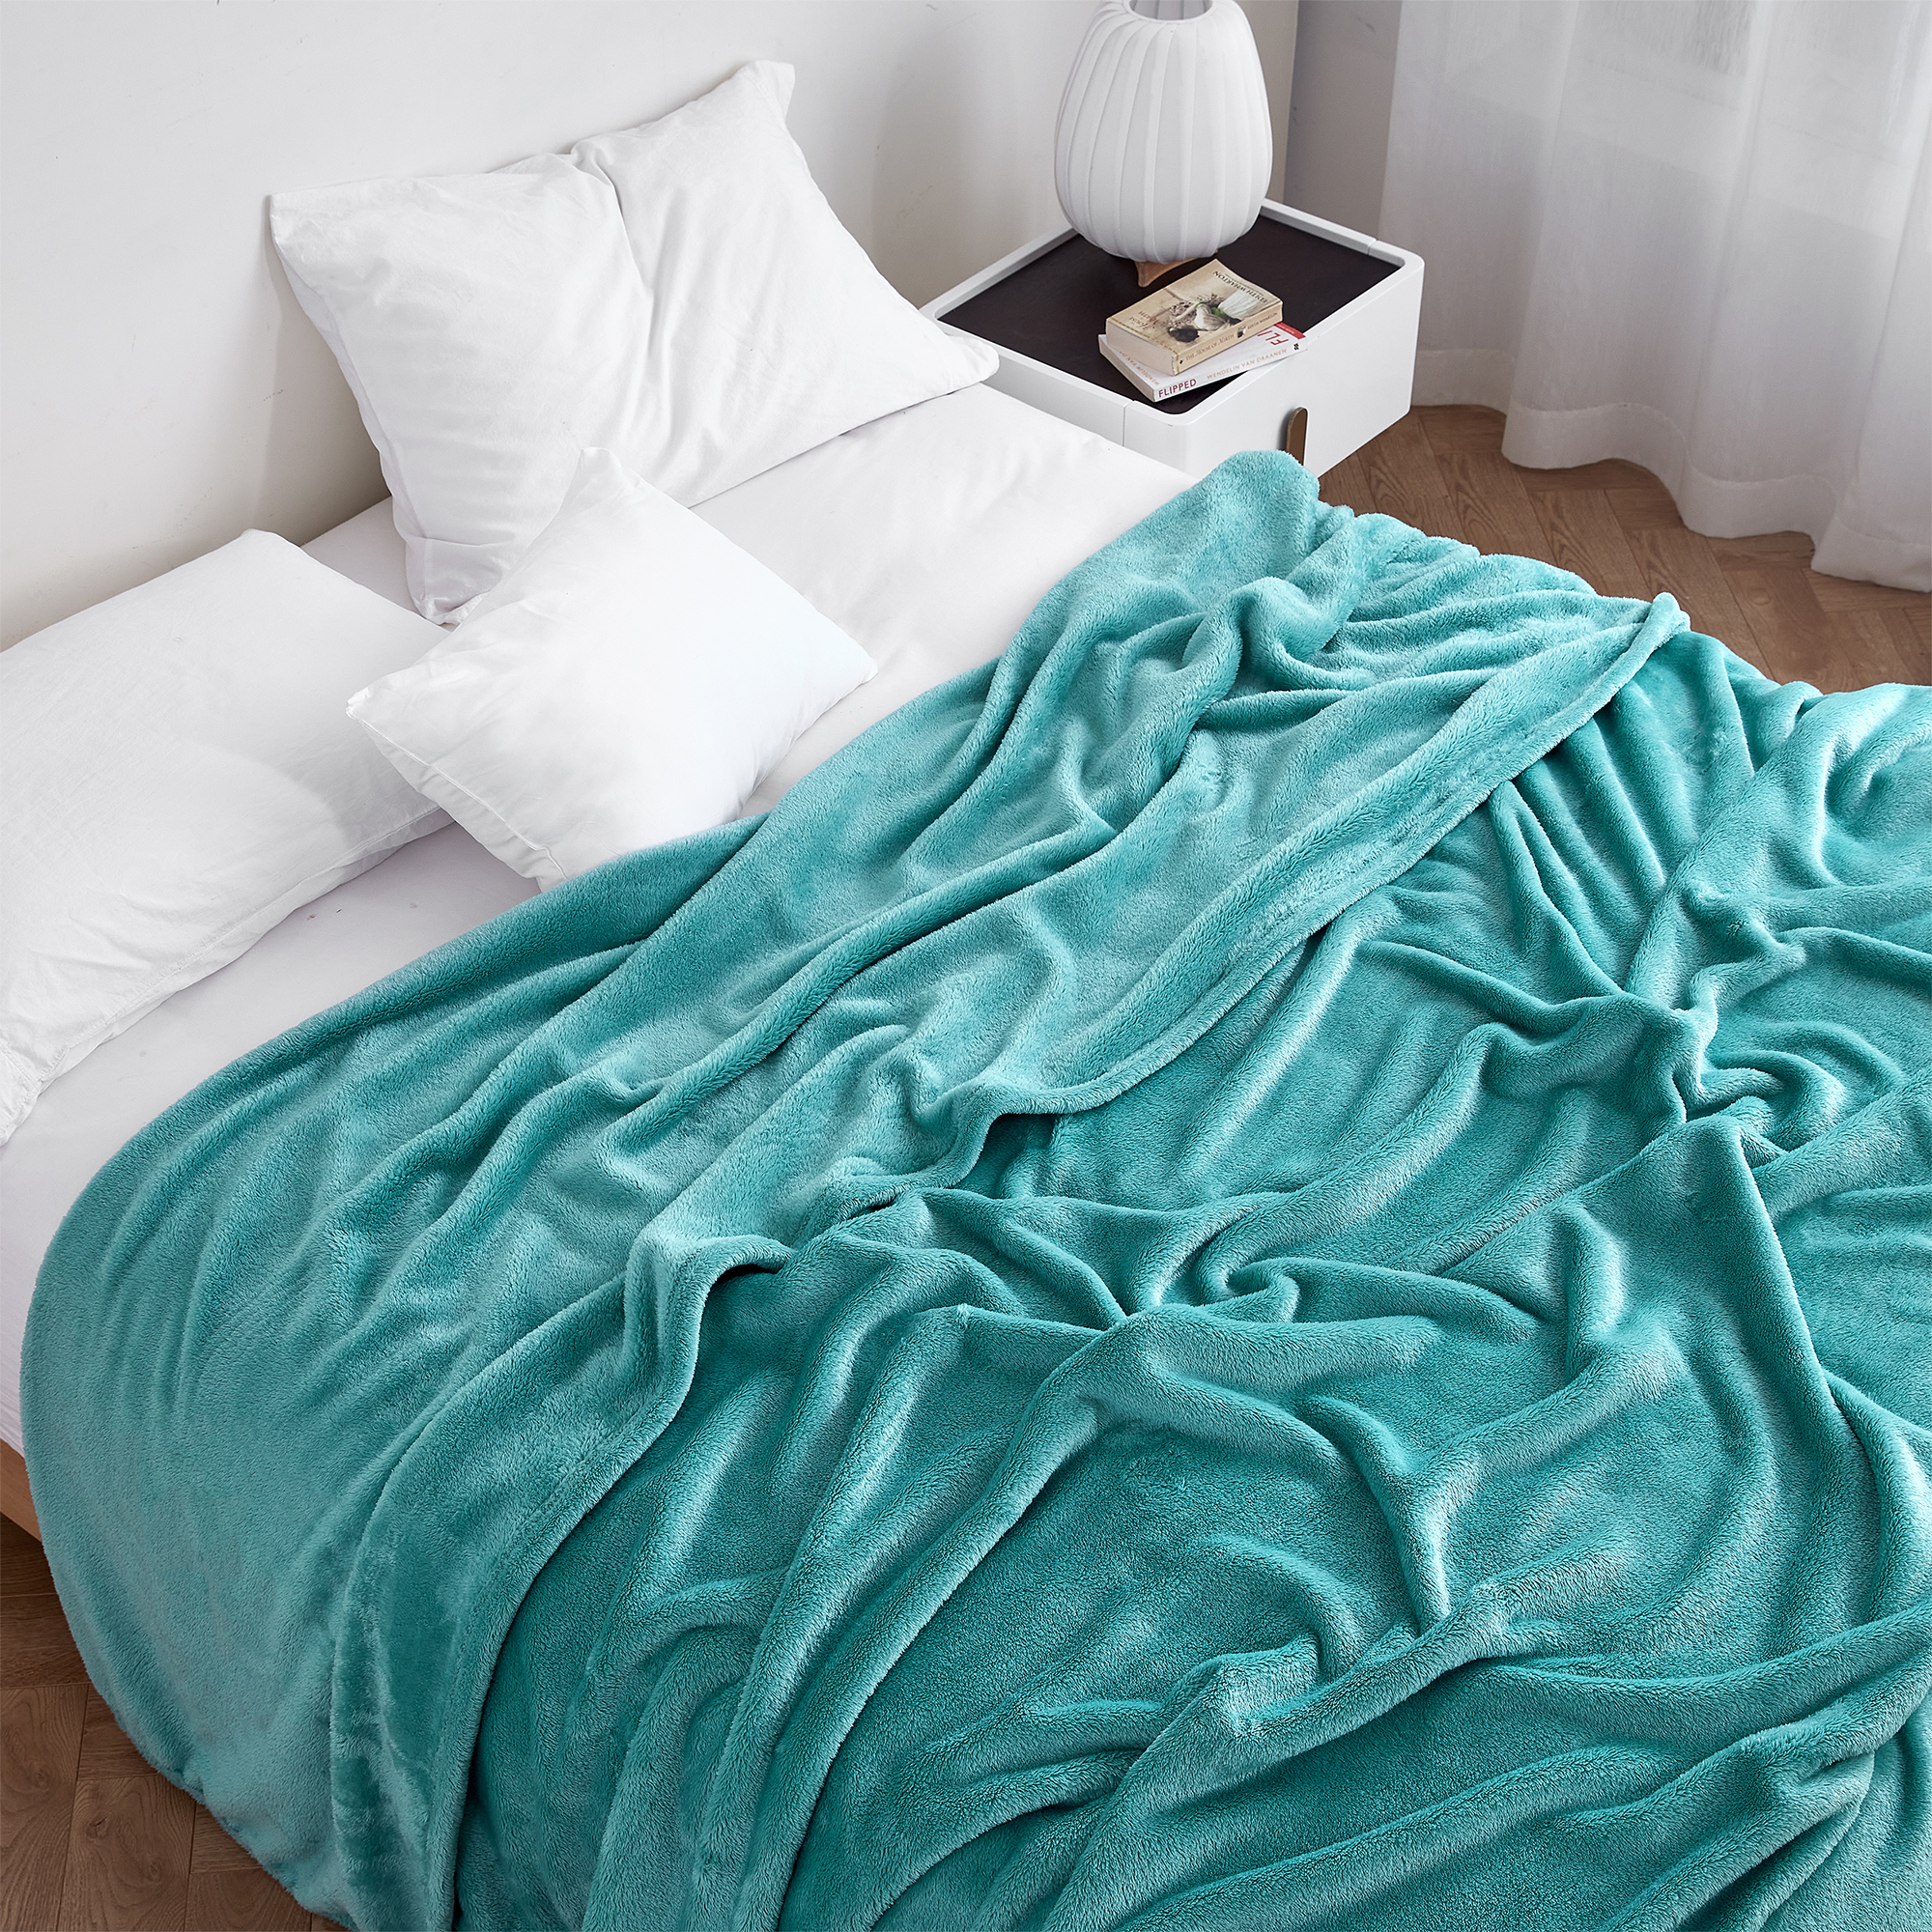 Dusty Turquoise King Sized Bedding Blanket Made with Super Soft Plush Bedding Materials